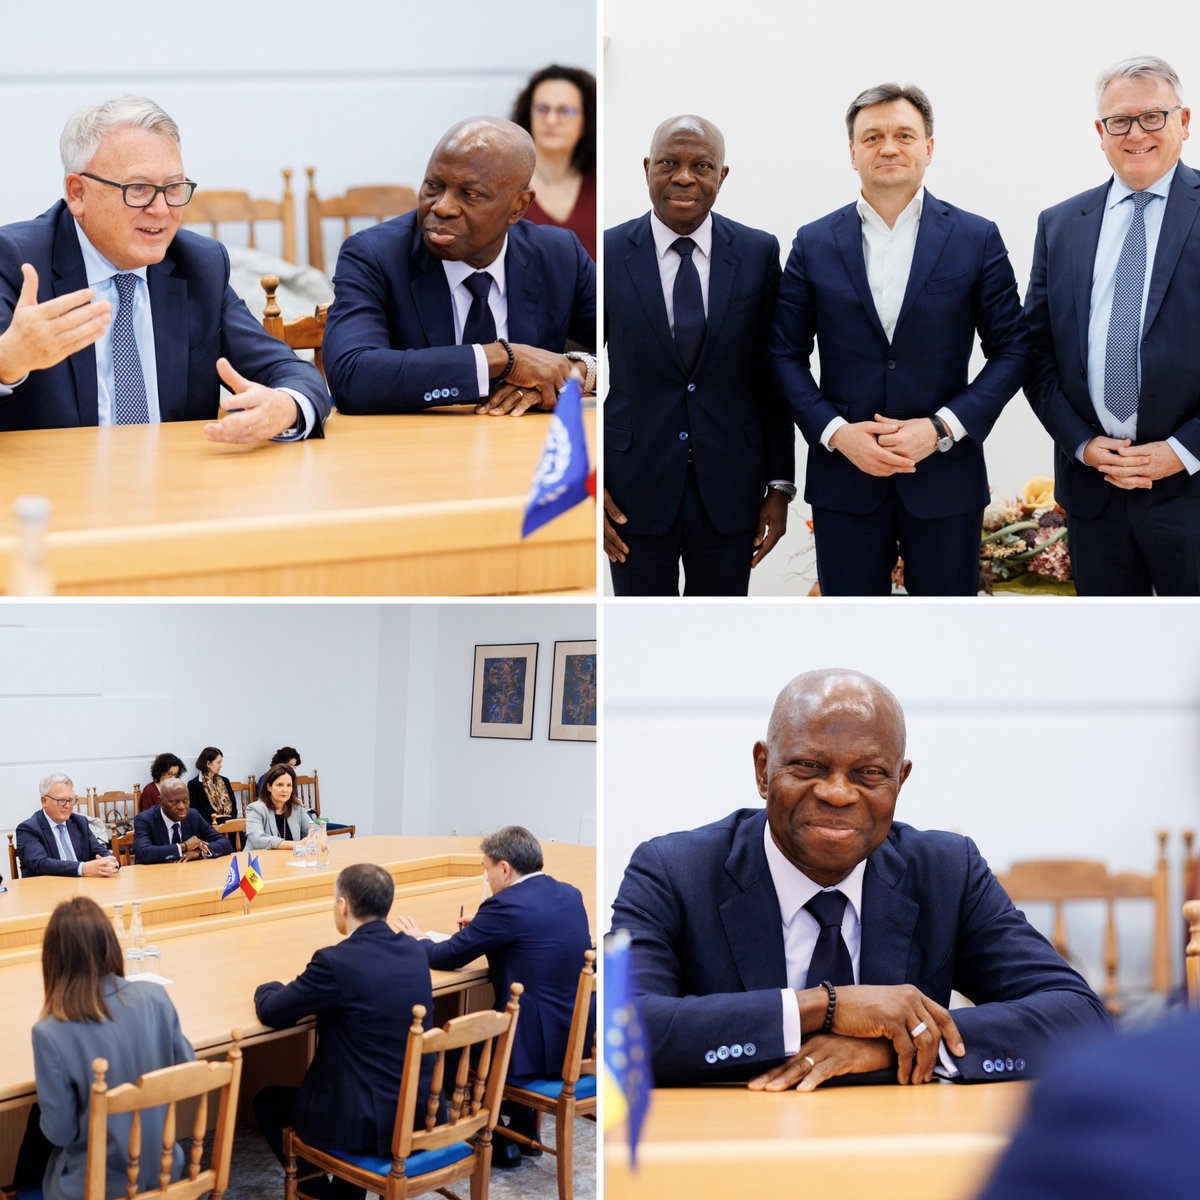 Honoured to join @ilo Director General @GilbertFHoungbo in Moldova 🇲🇩 to discuss 🇪🇺 accession-related employment and social reforms. First meeting with Prime Minister @DorinRecean was a good opportunity to exchange on how to bring more people into the labour market.